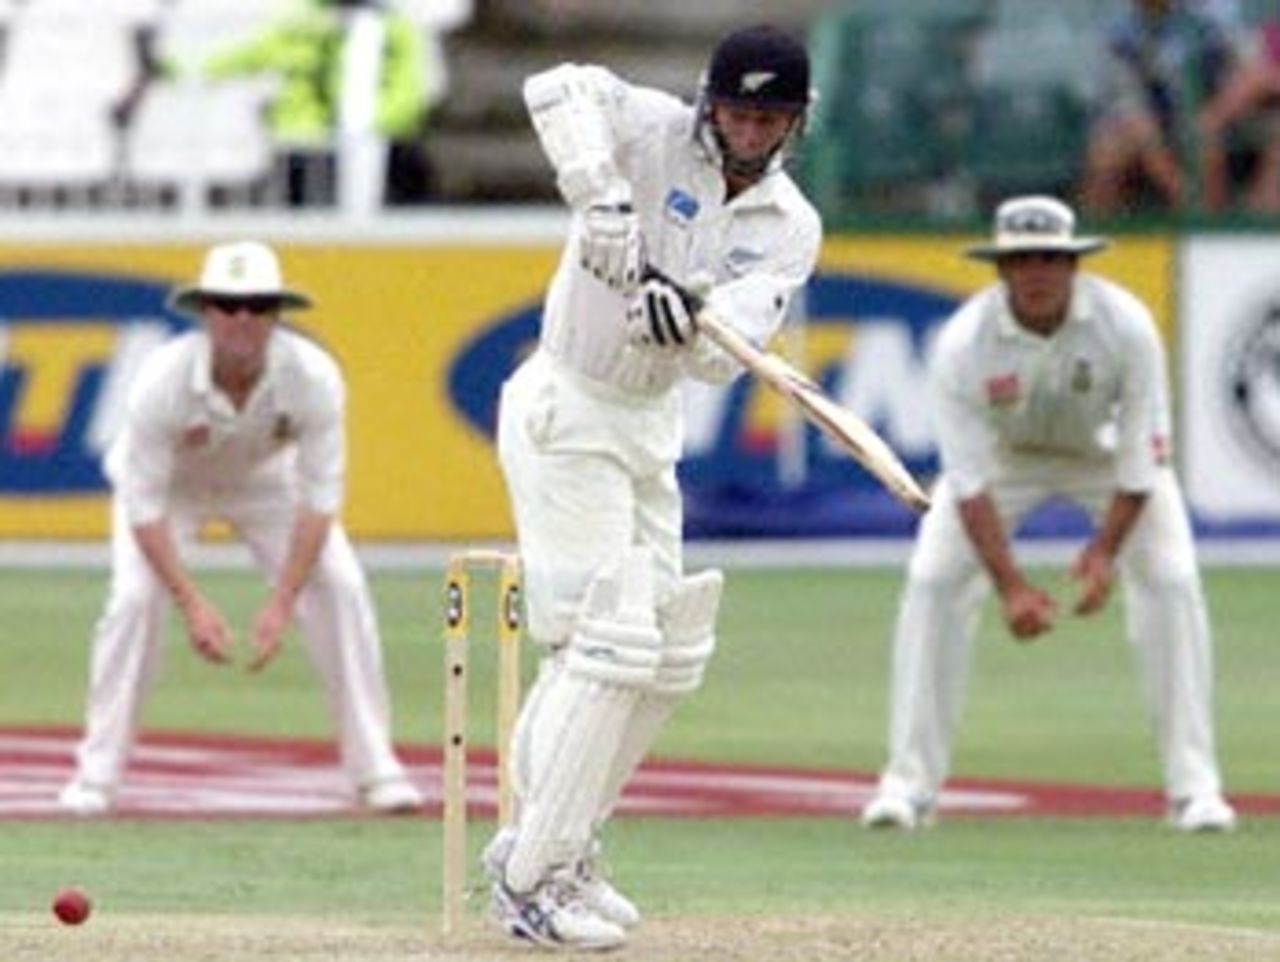 New Zealand's batsman Mark Richardson stops a fast ball 09 December 2000 , during the second day of the third and last five day cricket test between the two countries , at the Wanderers cricket grounds in Johannesburg.